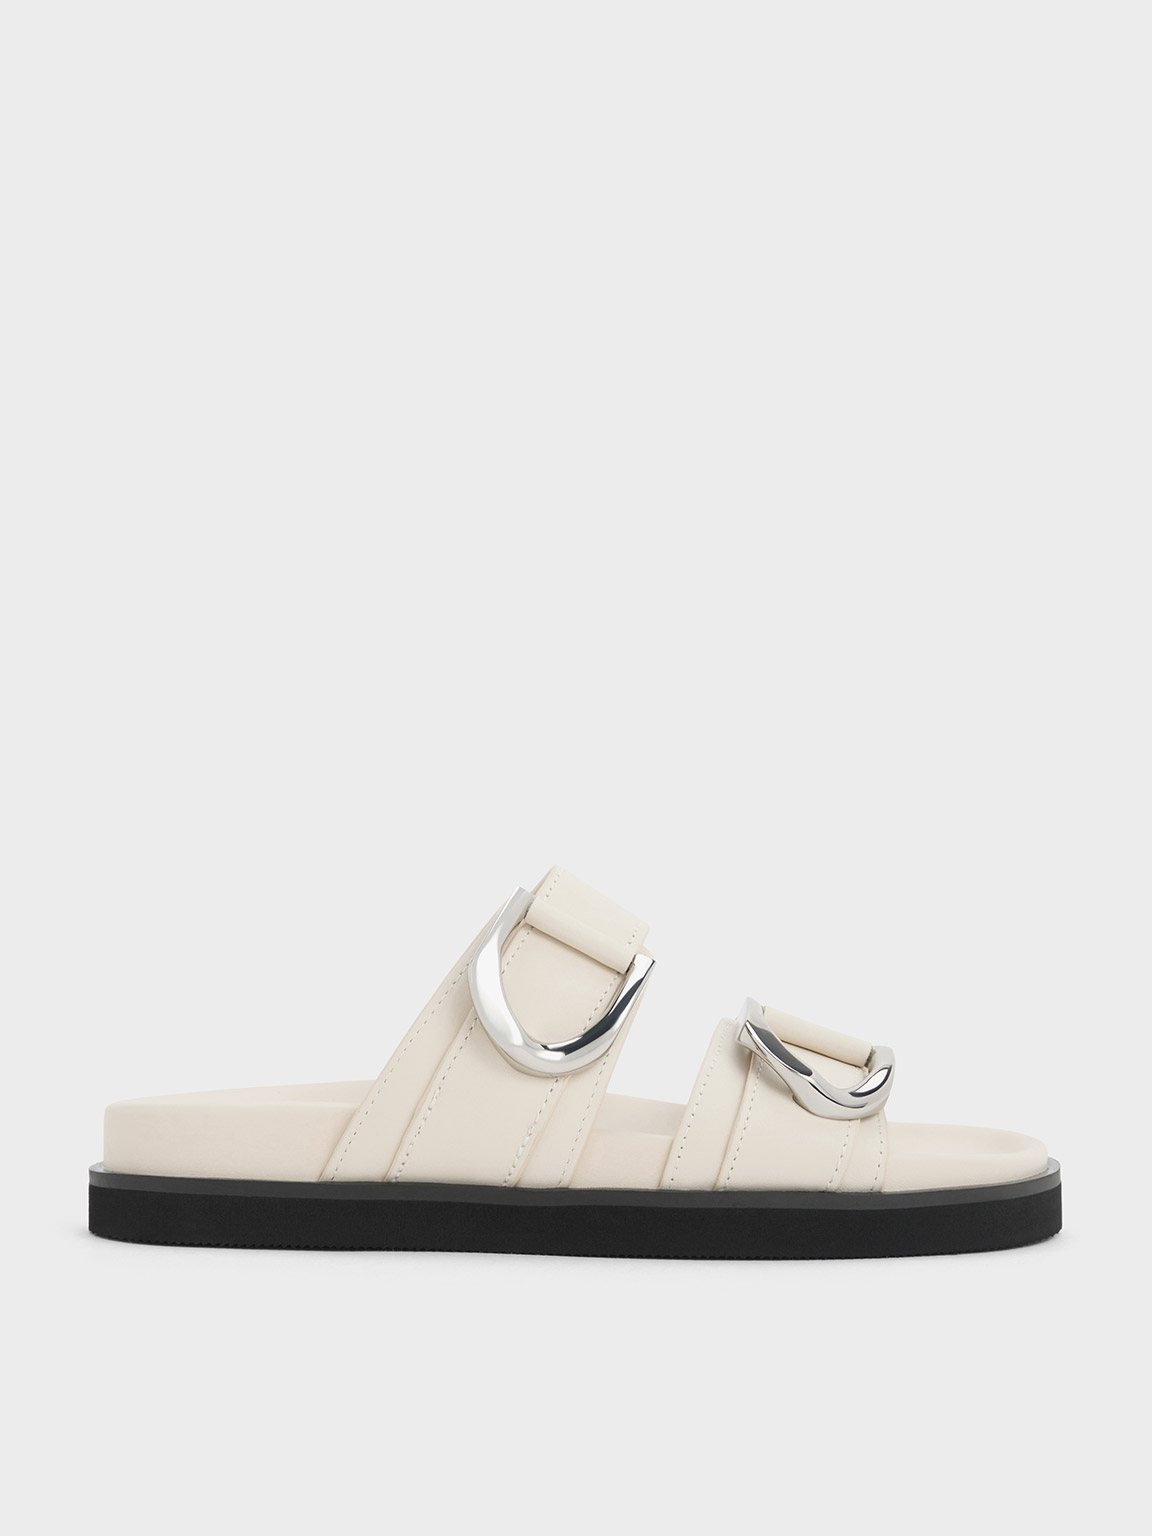 Charles & Keith Gabine Buckled Leather Slides In Chalk